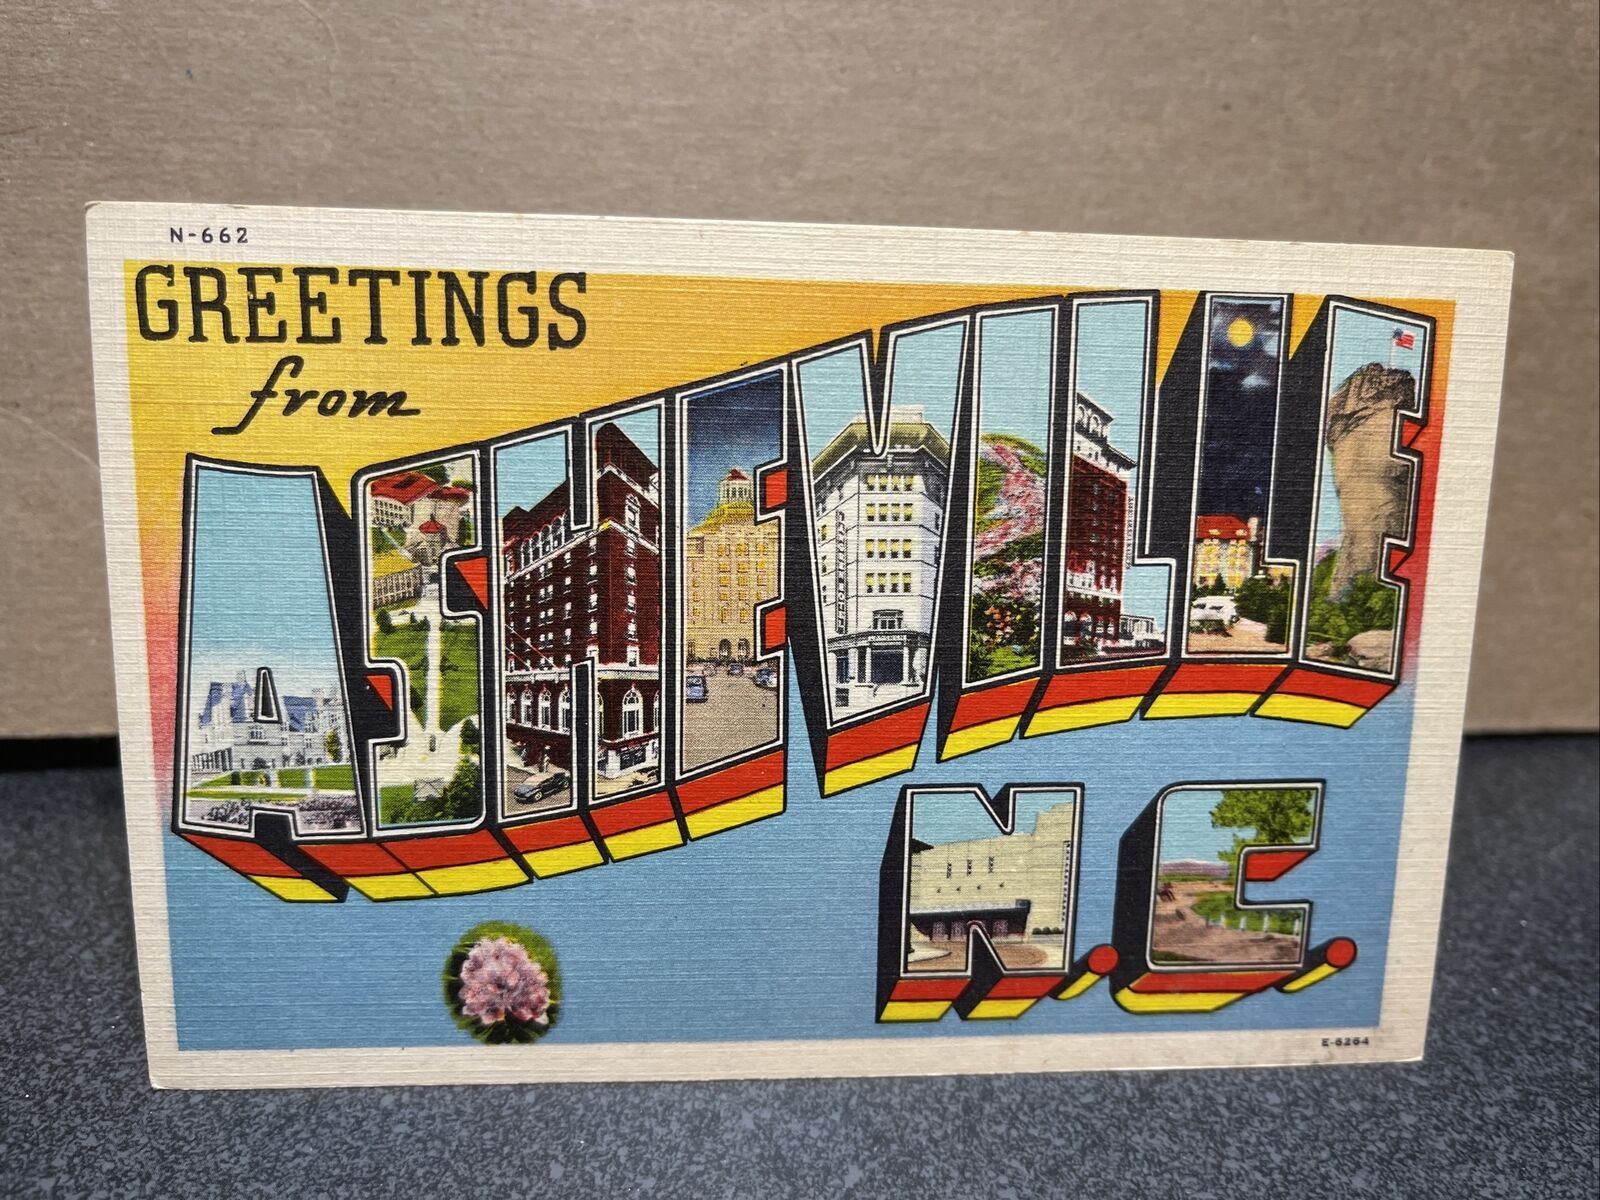 Greetings from Asheville North Carolina Big Letters Postcard￼